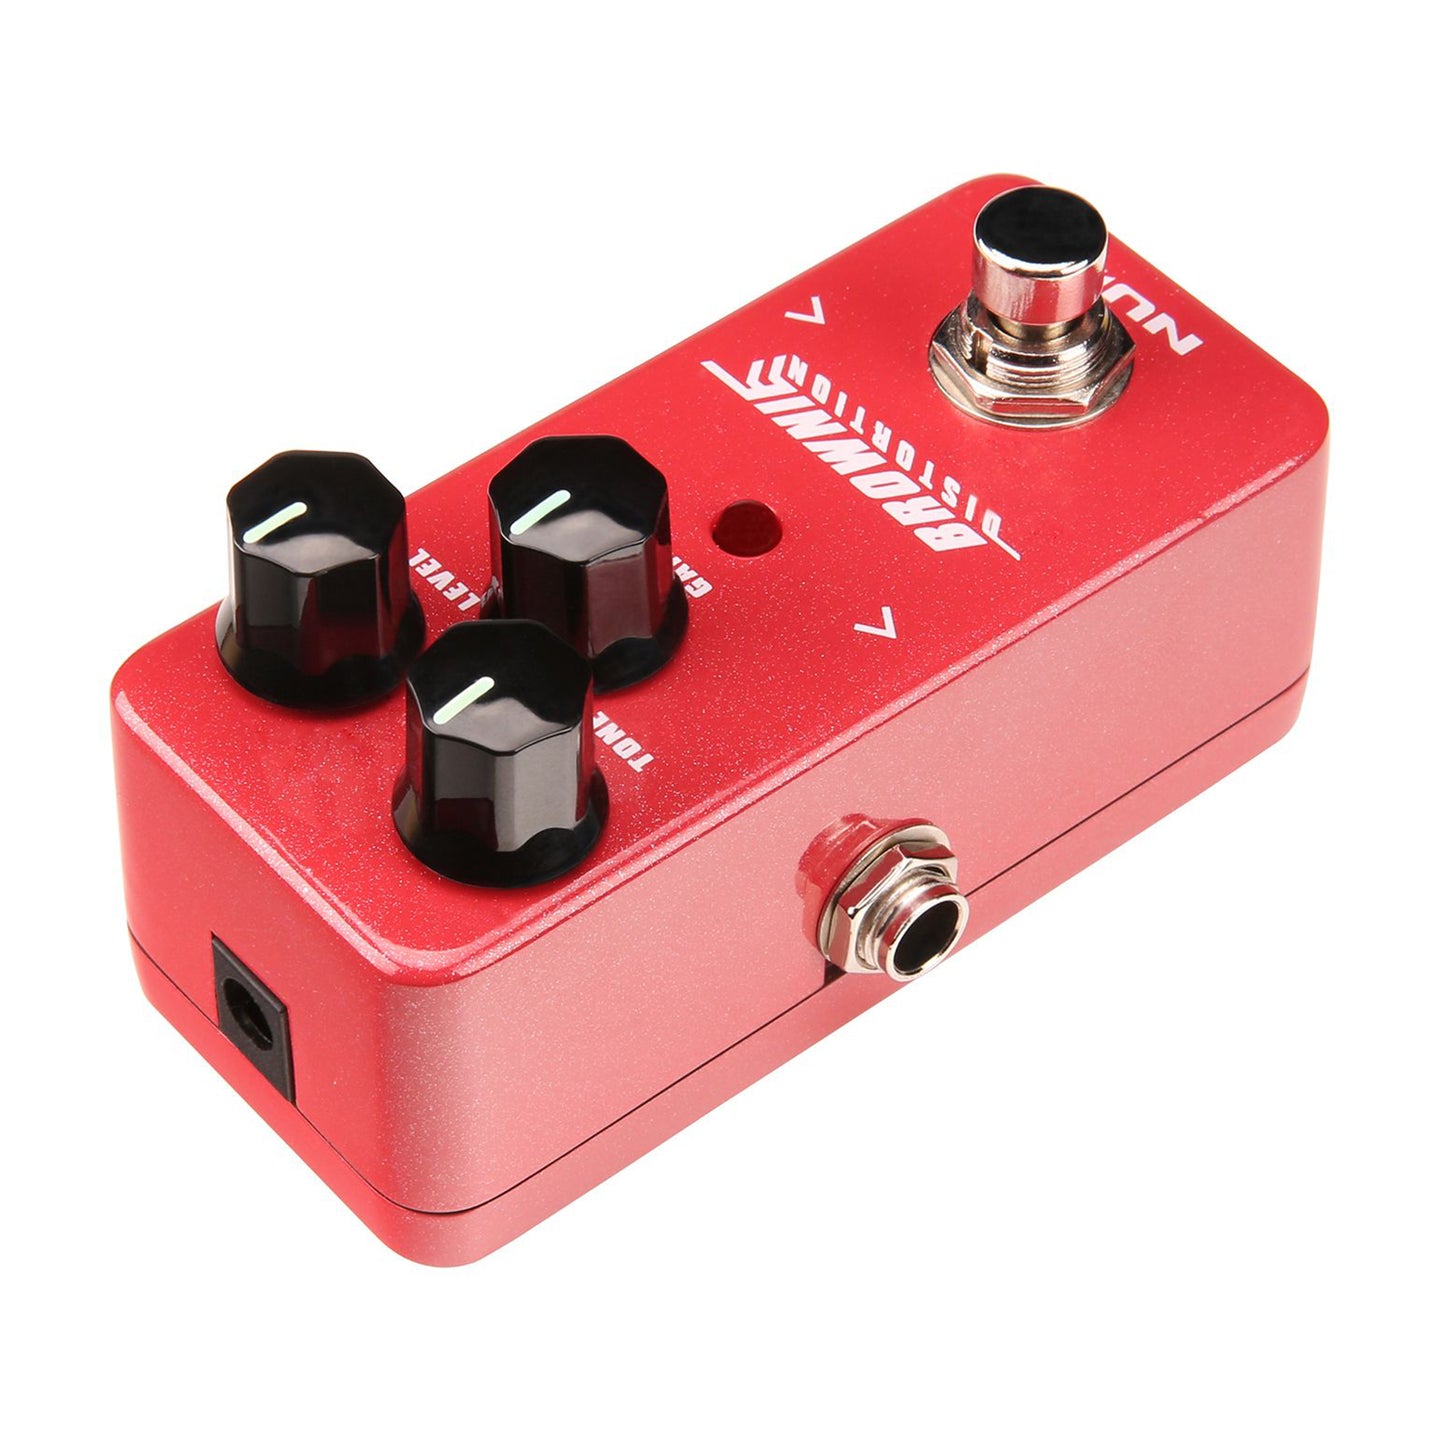 NUX Brownie Distortion Mini Guitar Effects Pedal with Classic British Rock Tone, Volume / Gain Control (NDS-2)